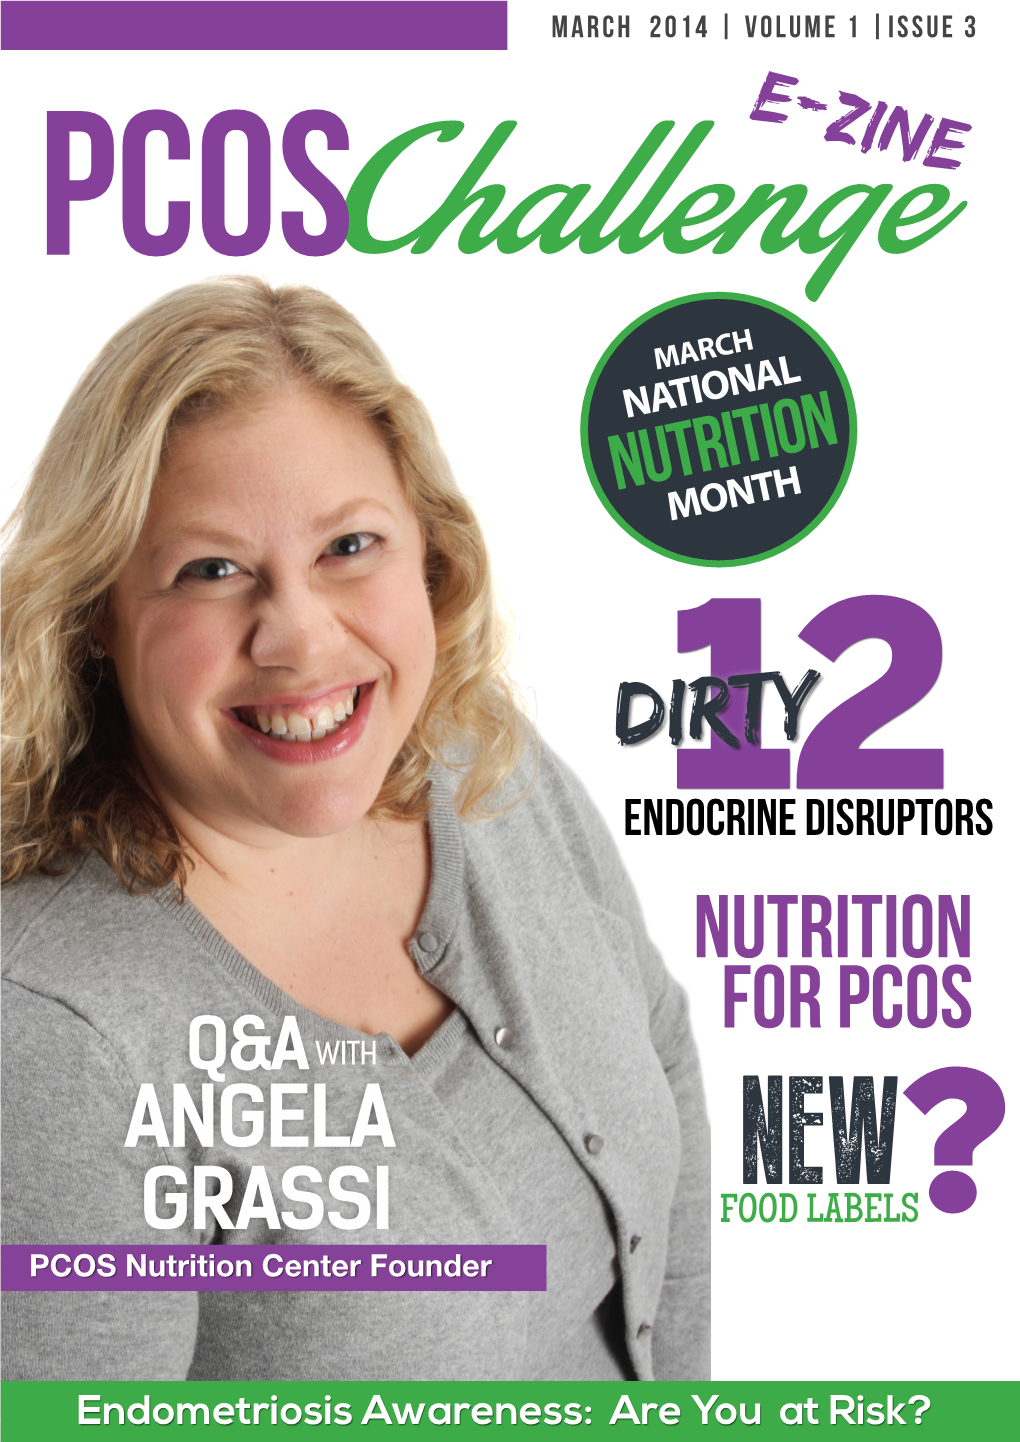 Nutrition for PCOS Q&A with ANGELA NEW GRASSI FOOD LABELS? PCOS Nutrition Center Founder